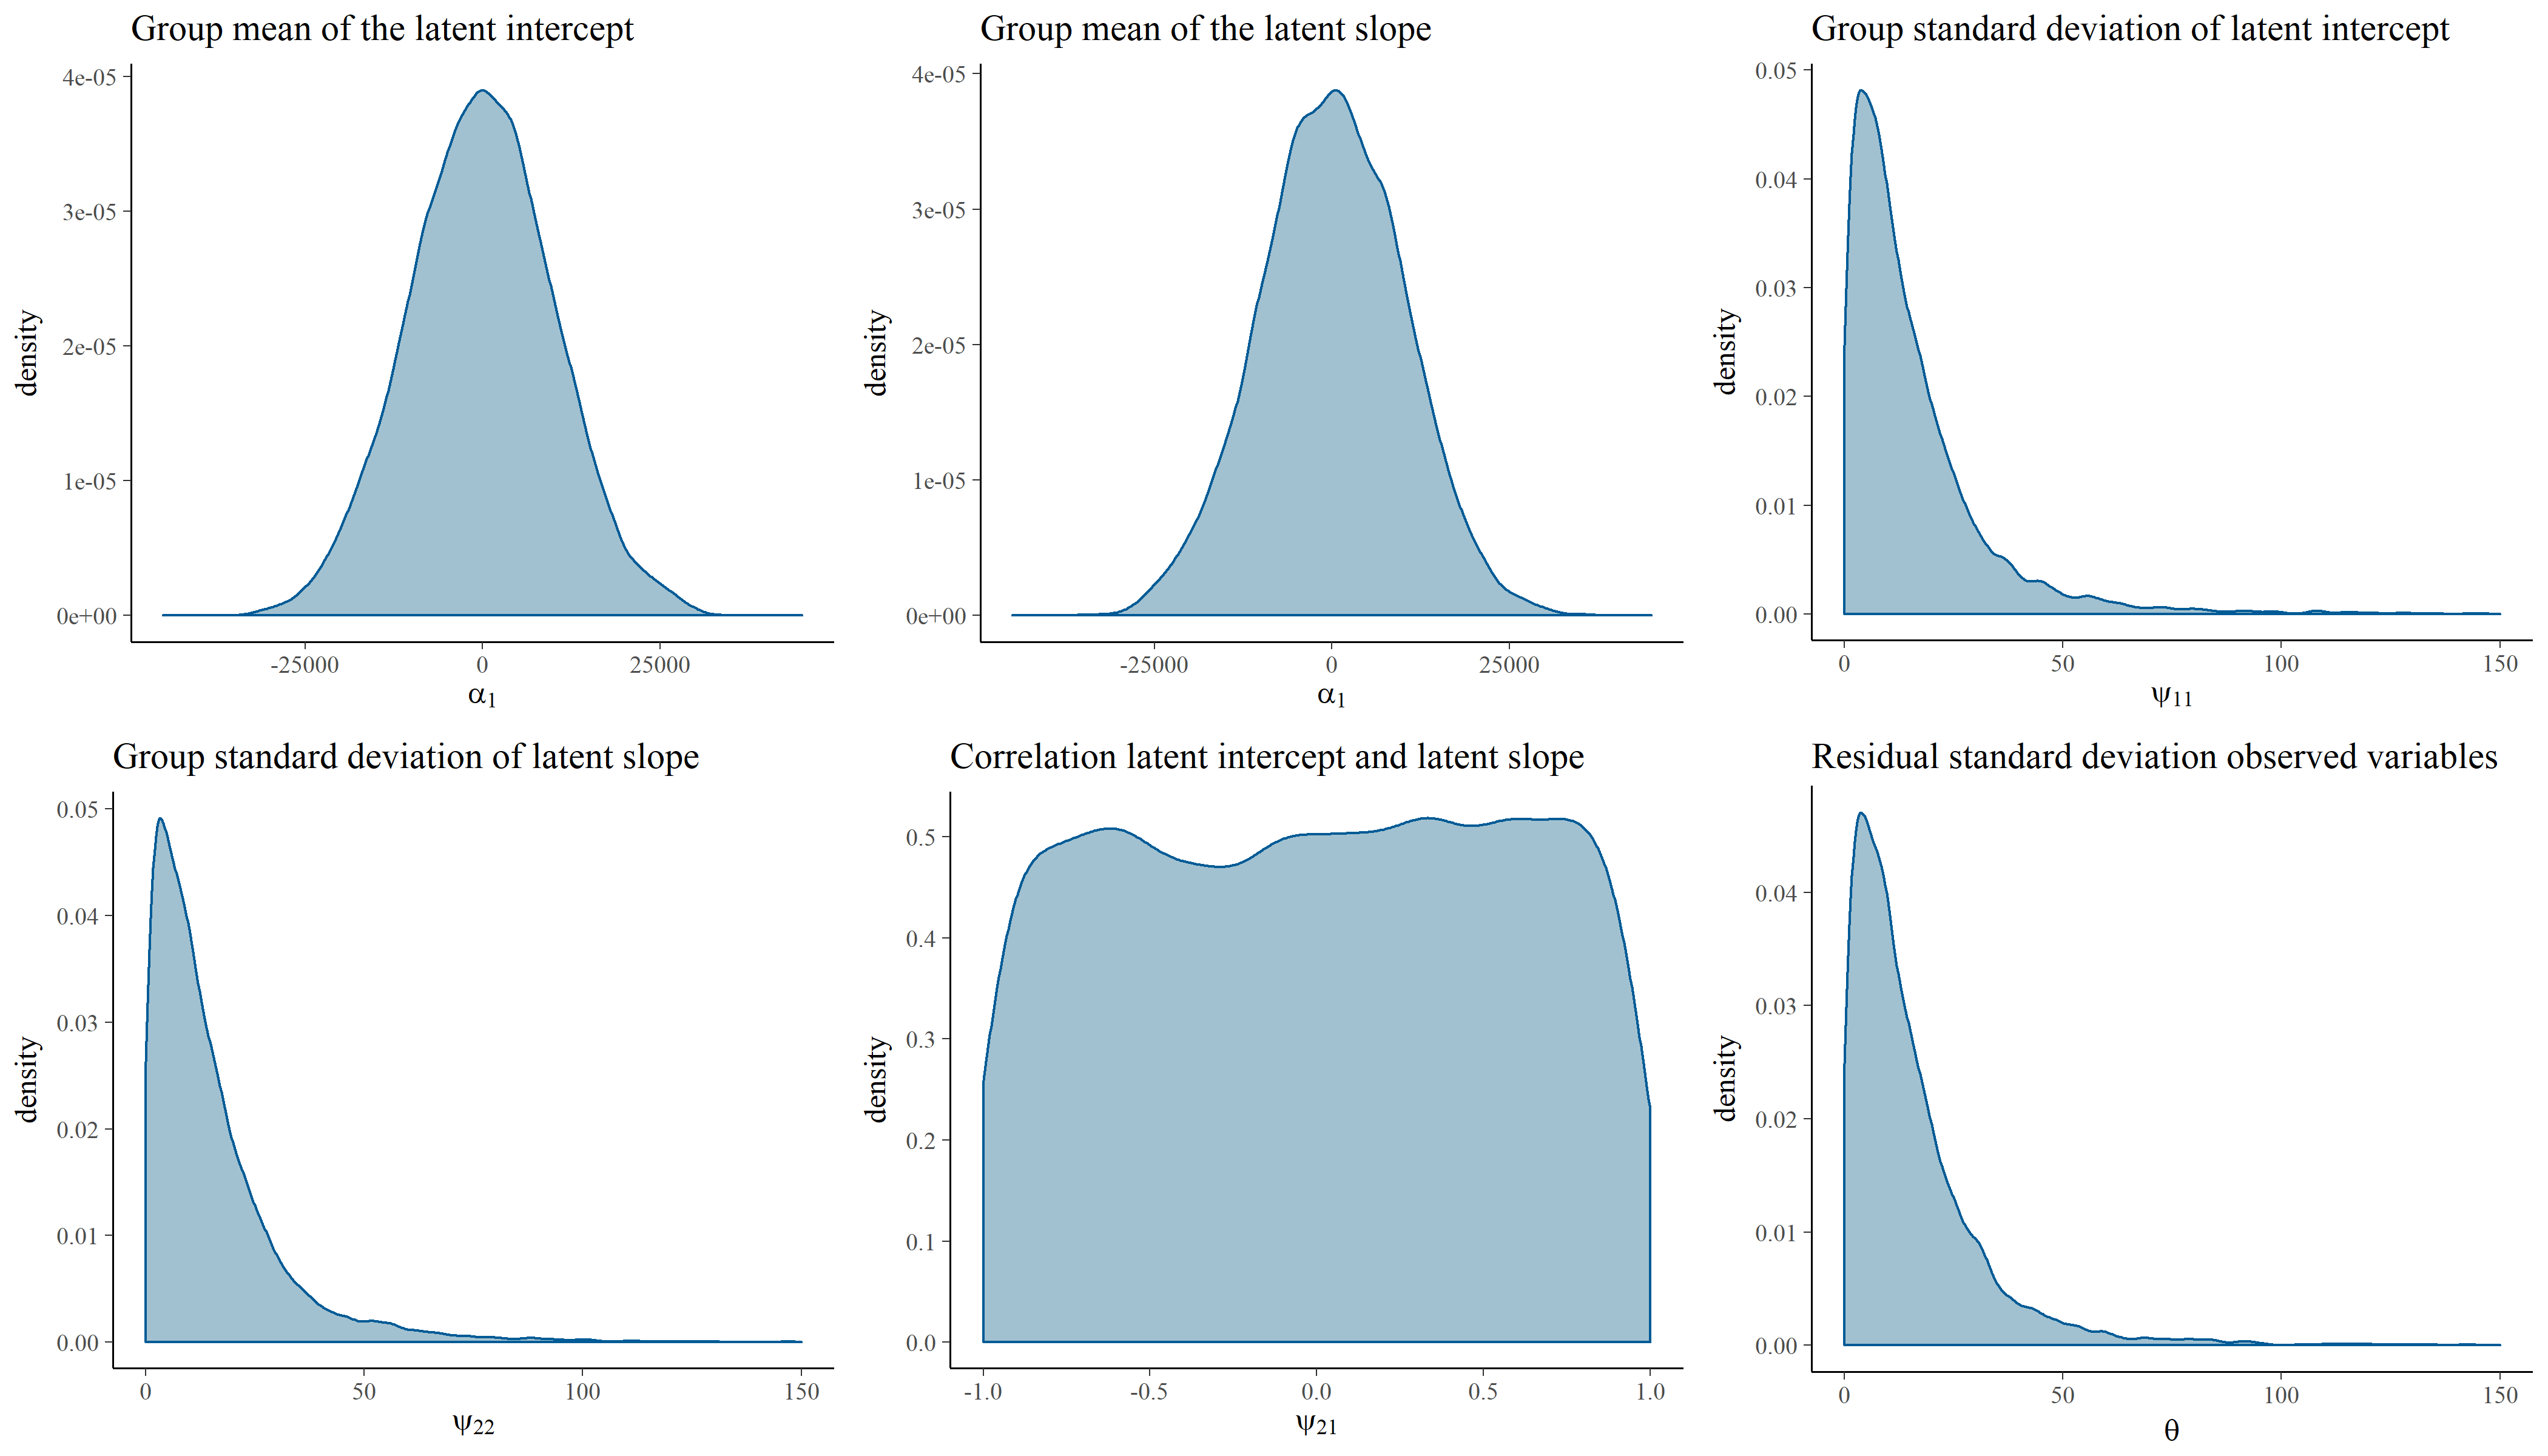 Visual representation of the prior distributions that are used to obtain the reference posterior. The prior distributions are \(\alpha_1 \sim N(0, 10^8)\), \(\alpha_2 \sim N(0, 10^8)\), \(\psi_{11} \sim half-t(3, 0, 196)\), \(\psi_{22} \sim half-t(3, 0, 196)\), \(\psi_{21} \sim U(-1, 1)\), and \(\theta \sim half-t(3, 0, 196)\).